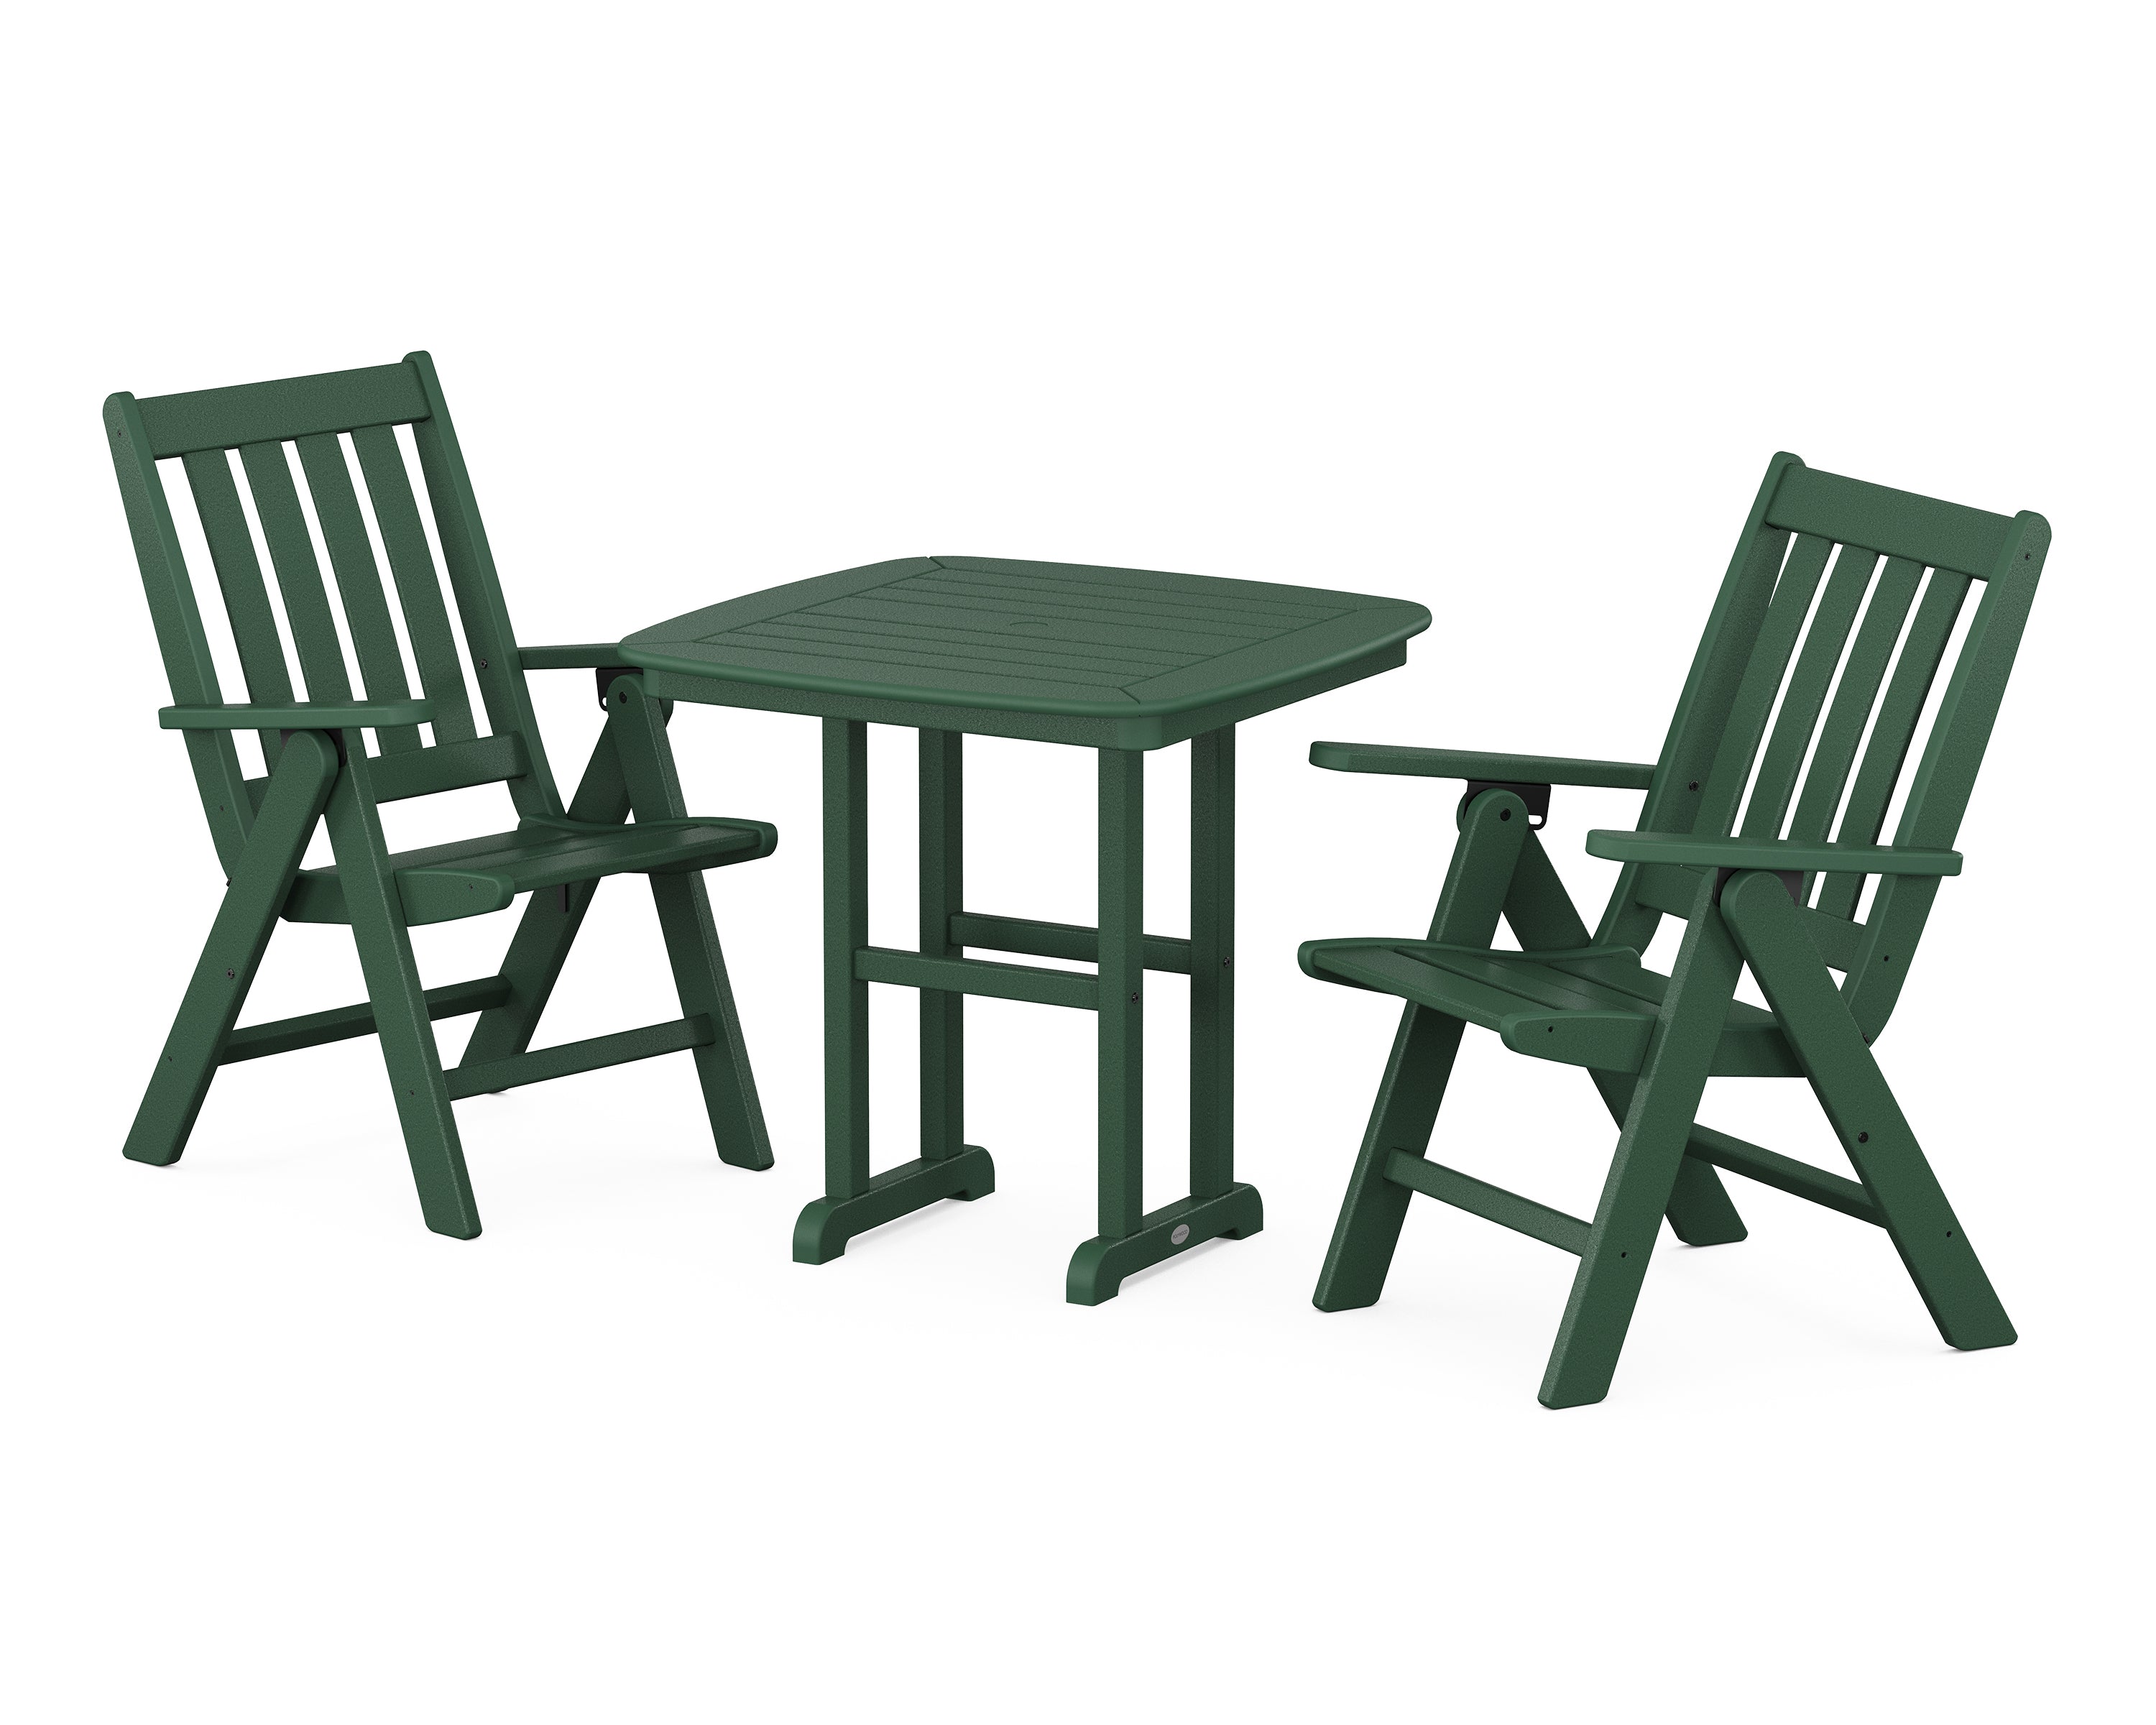 POLYWOOD® Vineyard Folding Chair 3-Piece Dining Set in Green